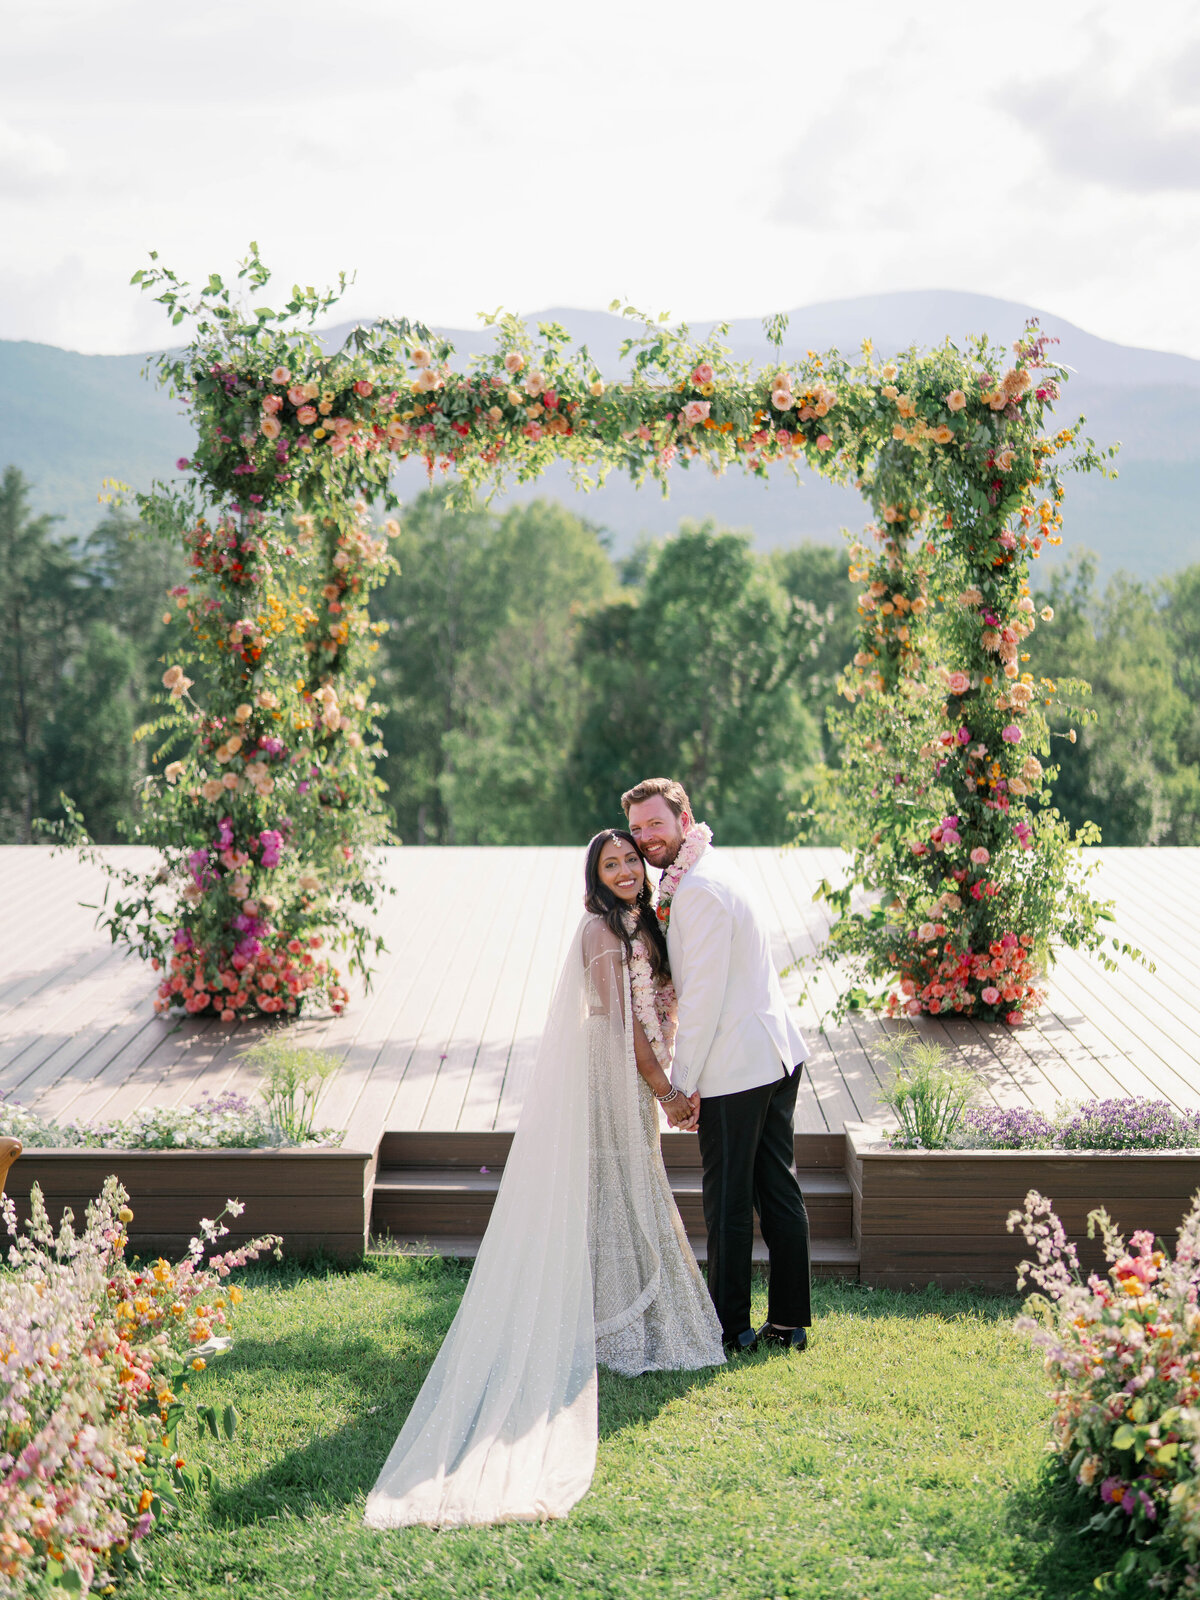 Liz Andolina Photography Destination Wedding Photographer in Italy, New York, Across the East Coast Editorial, heritage-quality images for stylish couples-771